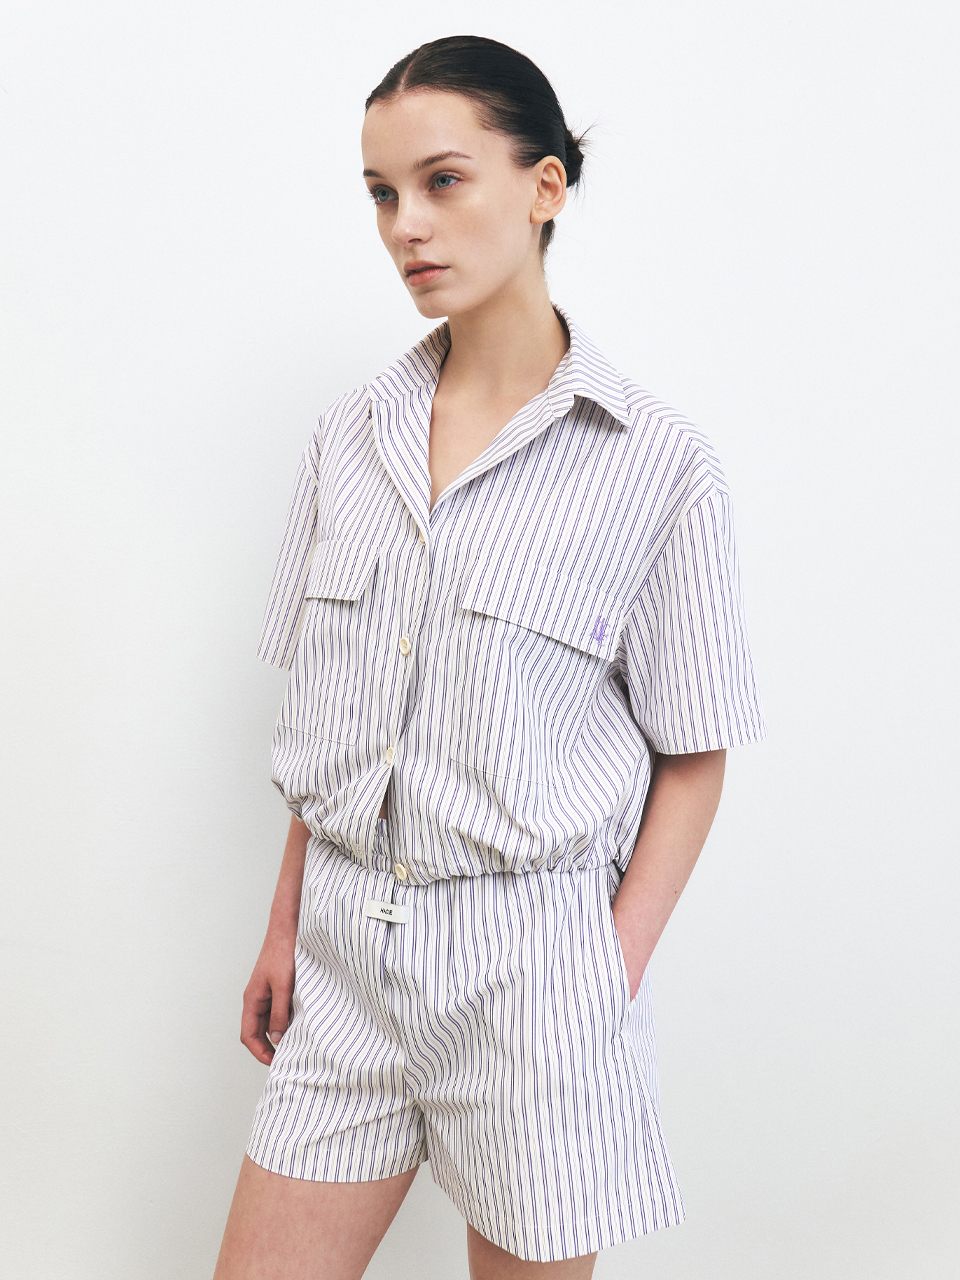 HACIE - VERTICAL STRIPE EMBROIDERY SHIRTS [3COLORS]